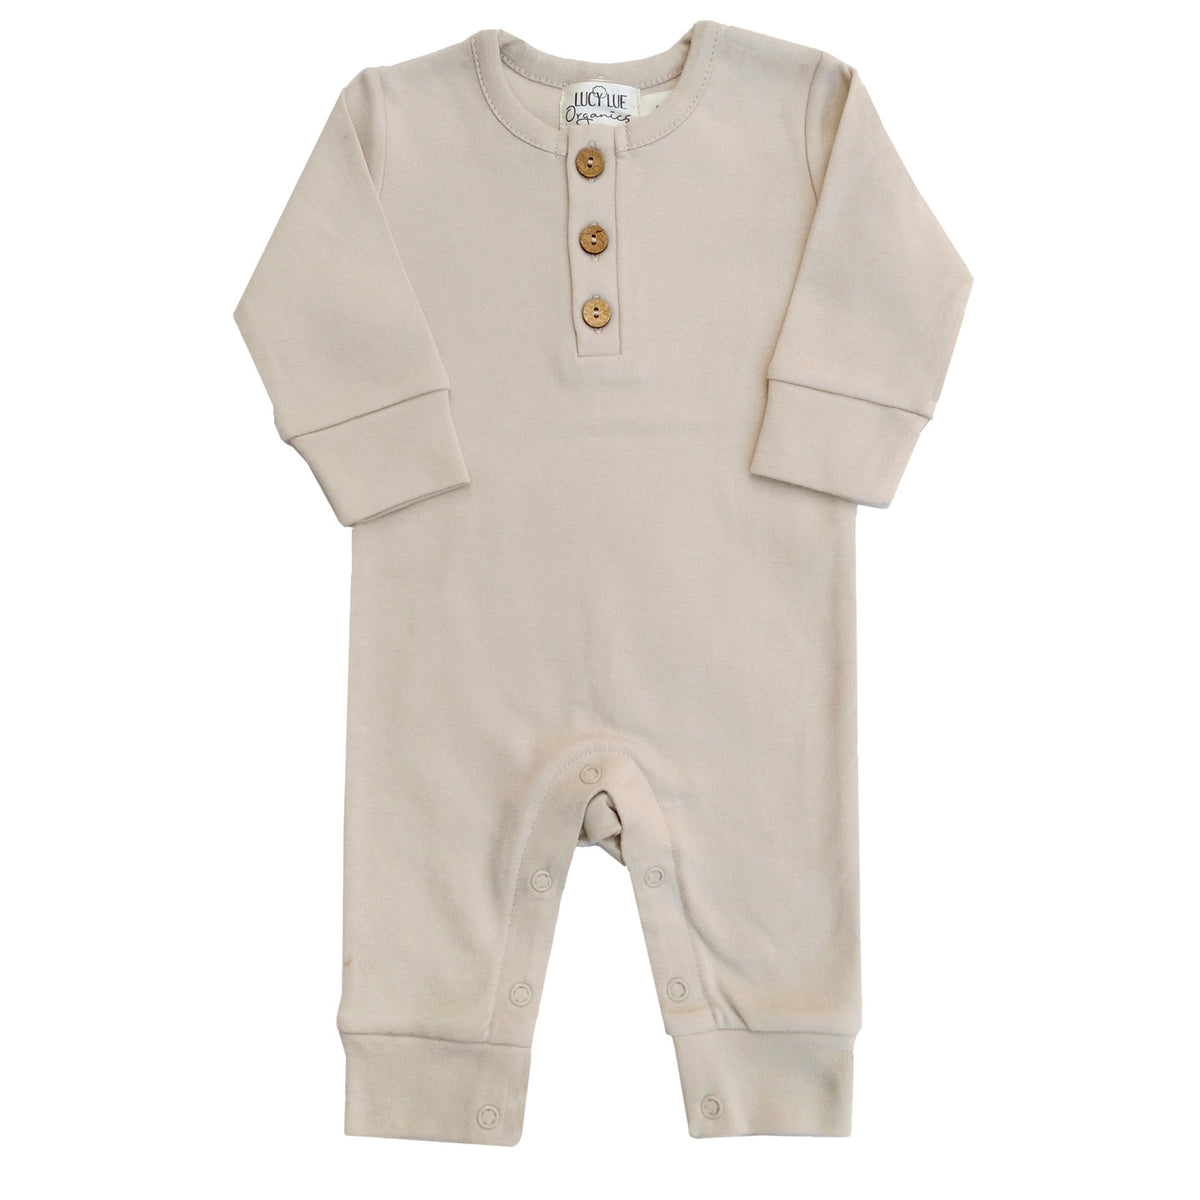 Organic baby romper, organic baby romper suits, organic romper baby boy, organic cotton baby romper, organic baby girl romper, baby rompers, long sleeve baby romper, organic baby shop, organic baby clothes, modern organic baby clothes, loved baby onesie, spearmint baby. button romper. gender neutral baby romper. baby girl romper. baby boy romper. organic onesie, organic baby one-piece